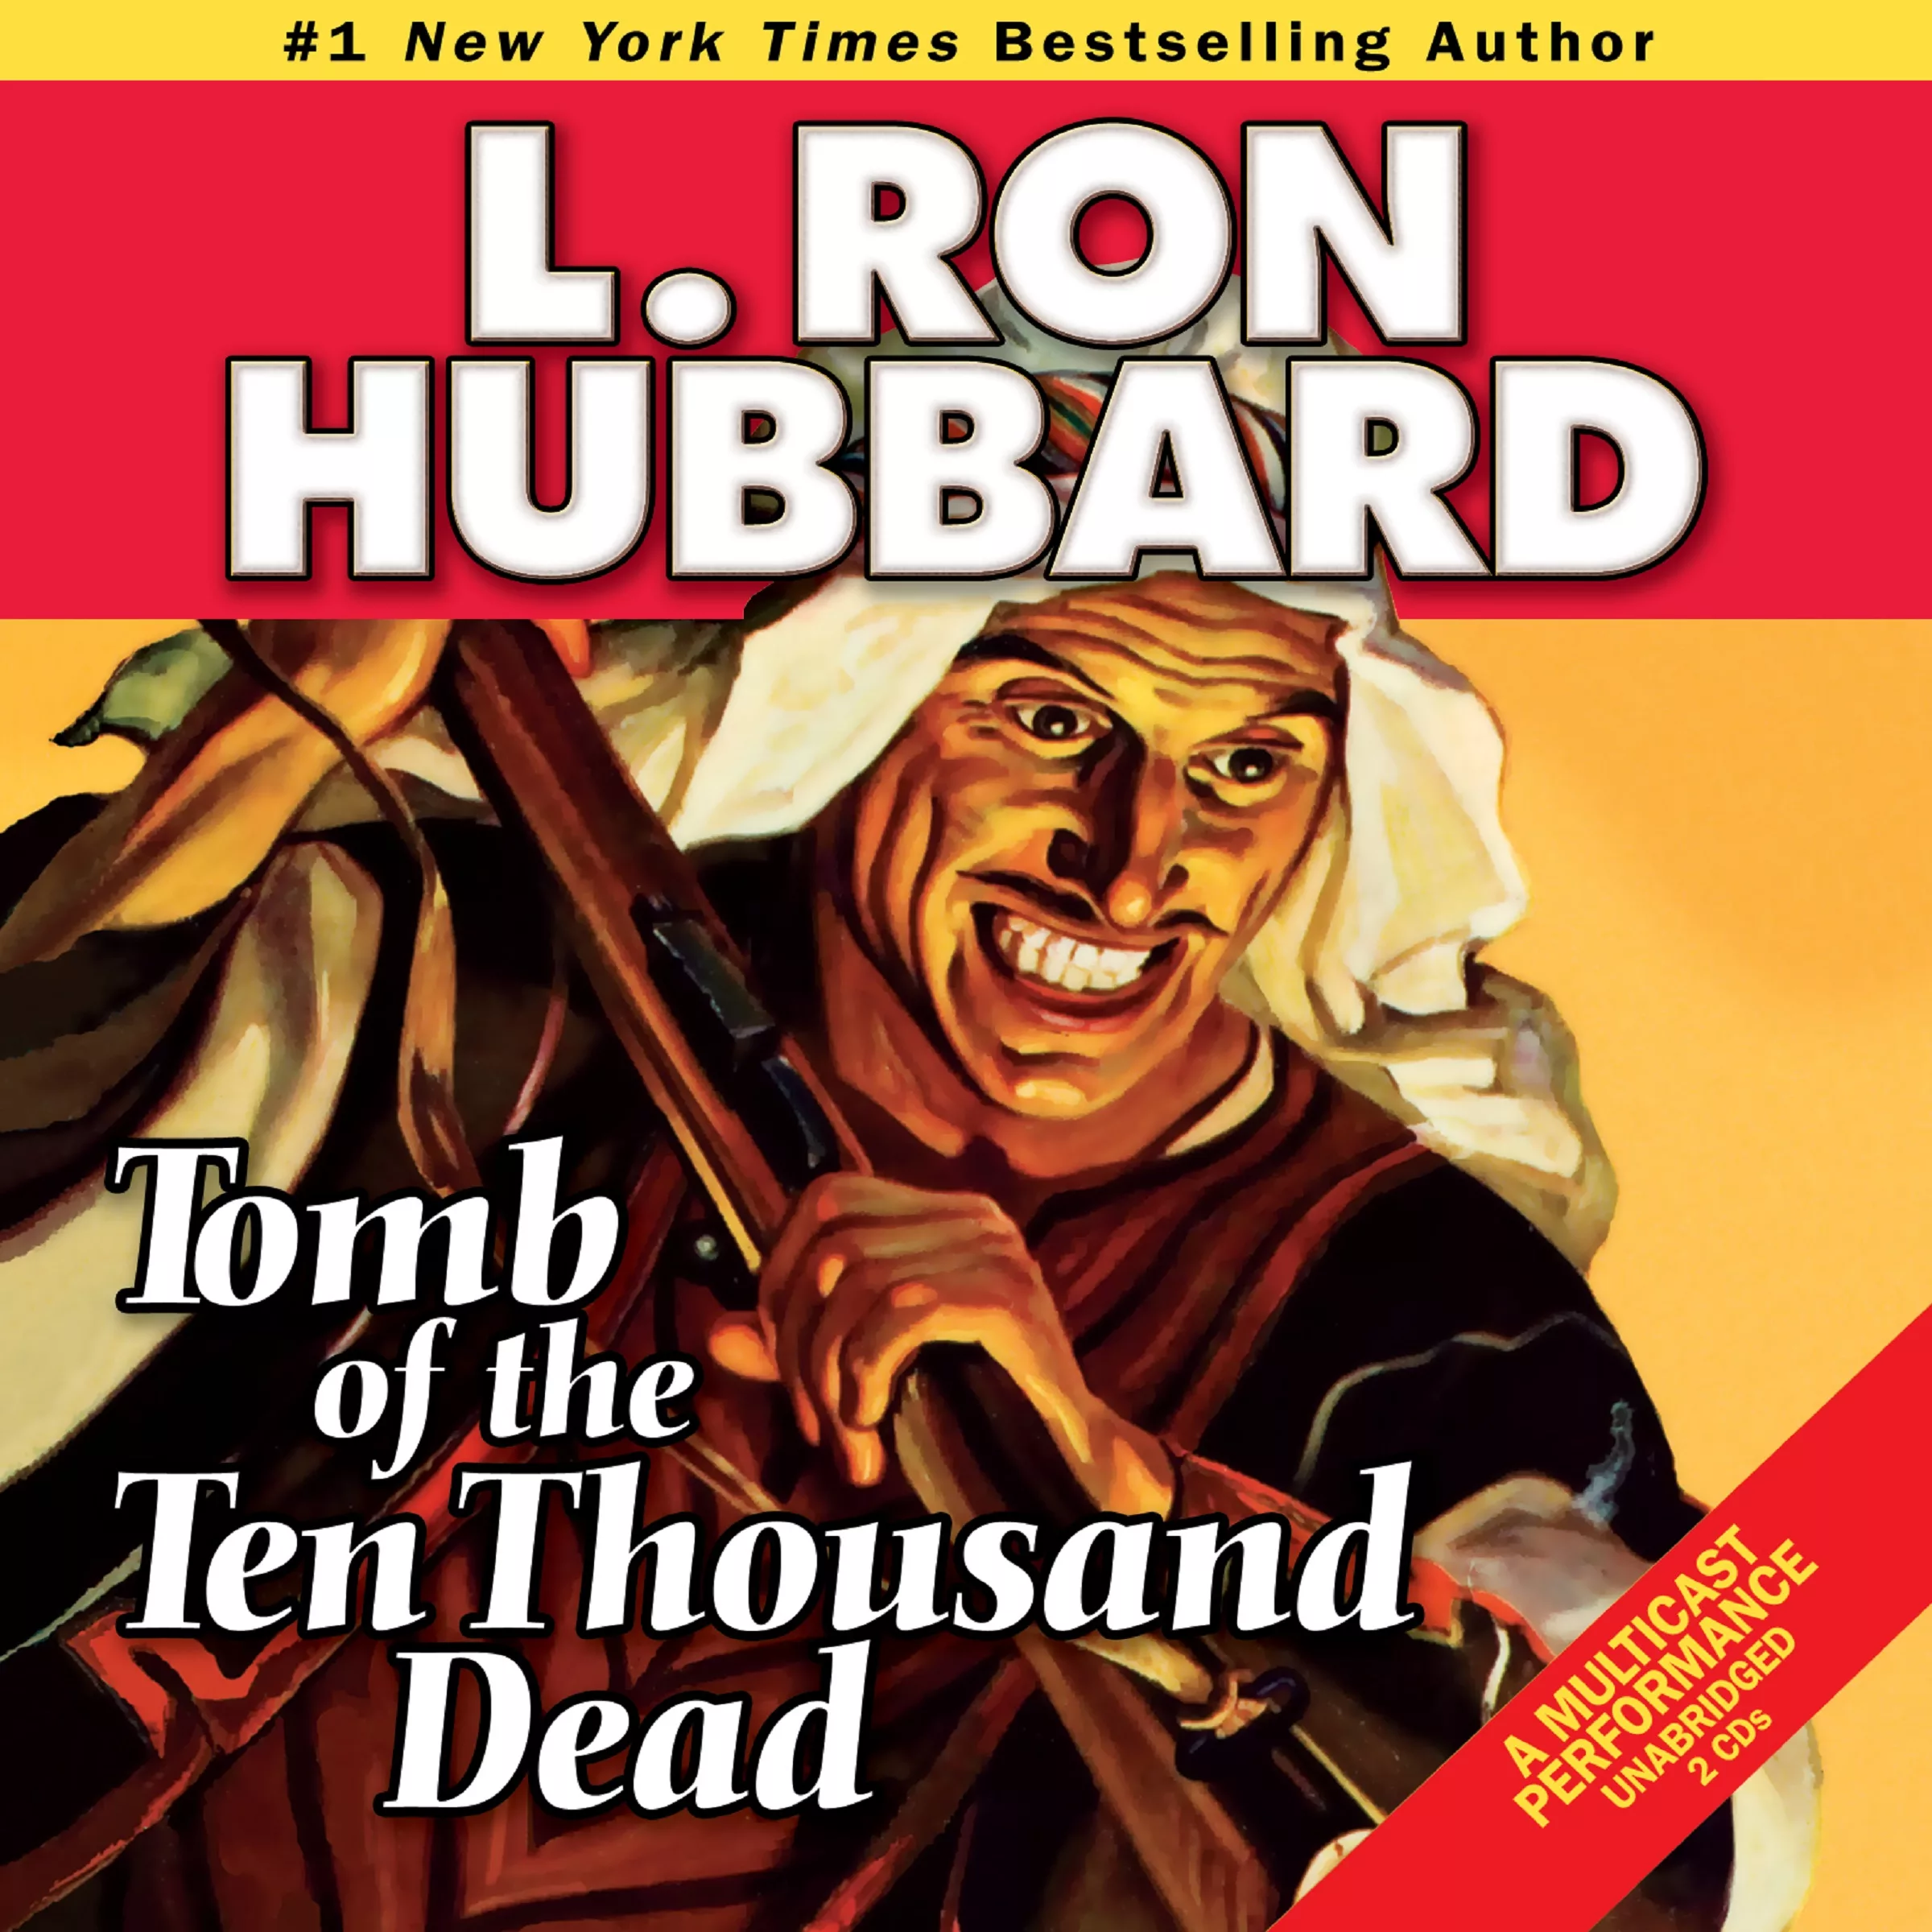 L Ron Hubbard Tomb of the 10000 dead